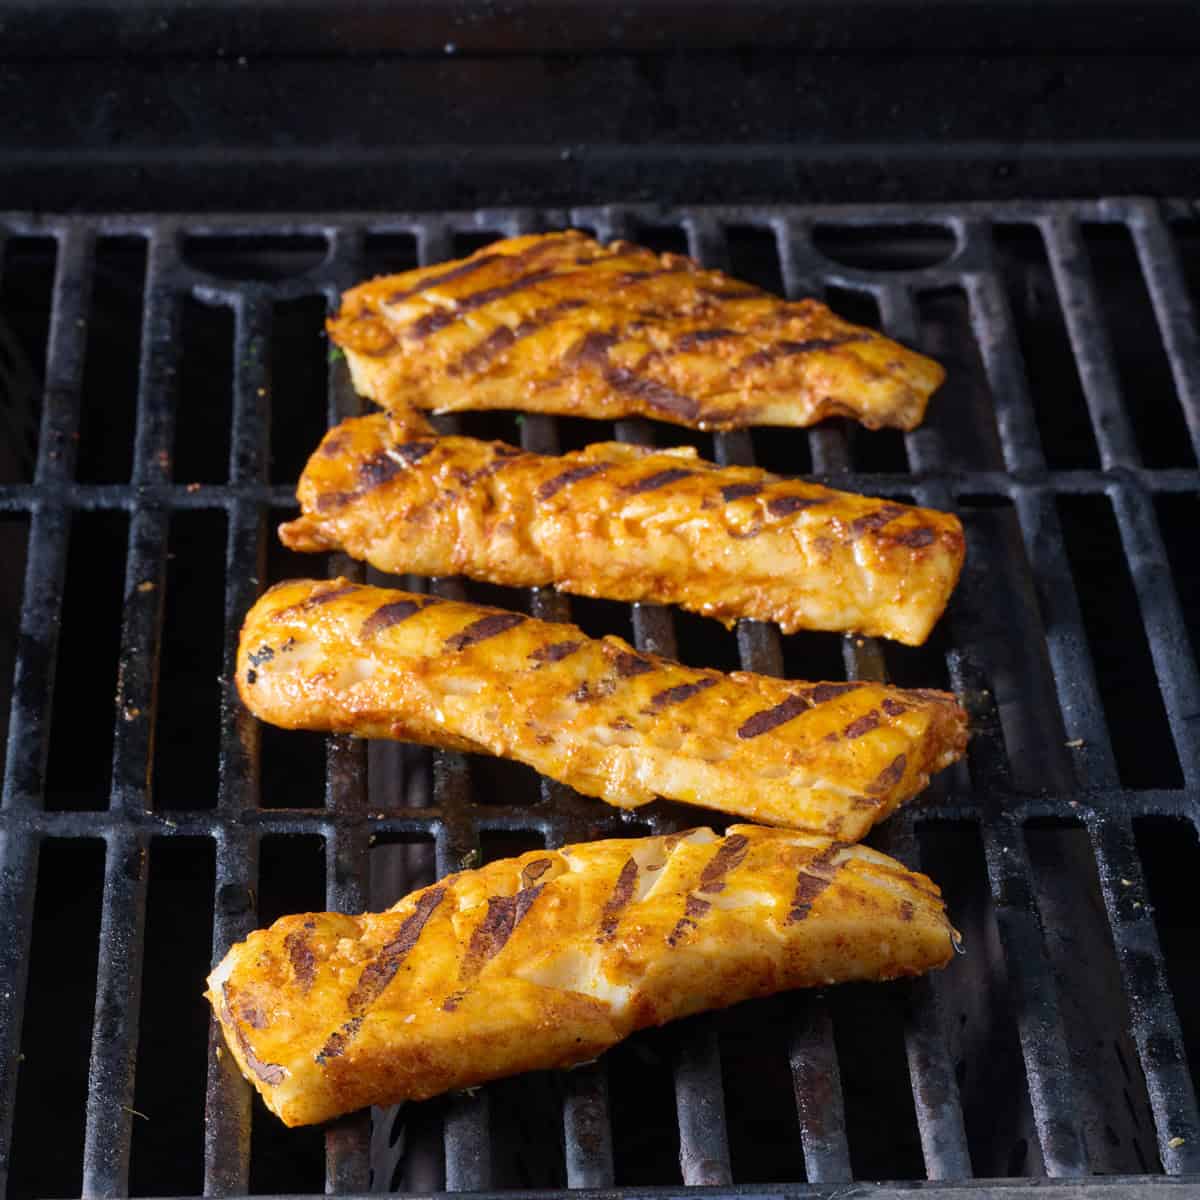 Fish fillets cooking on a gas grill.